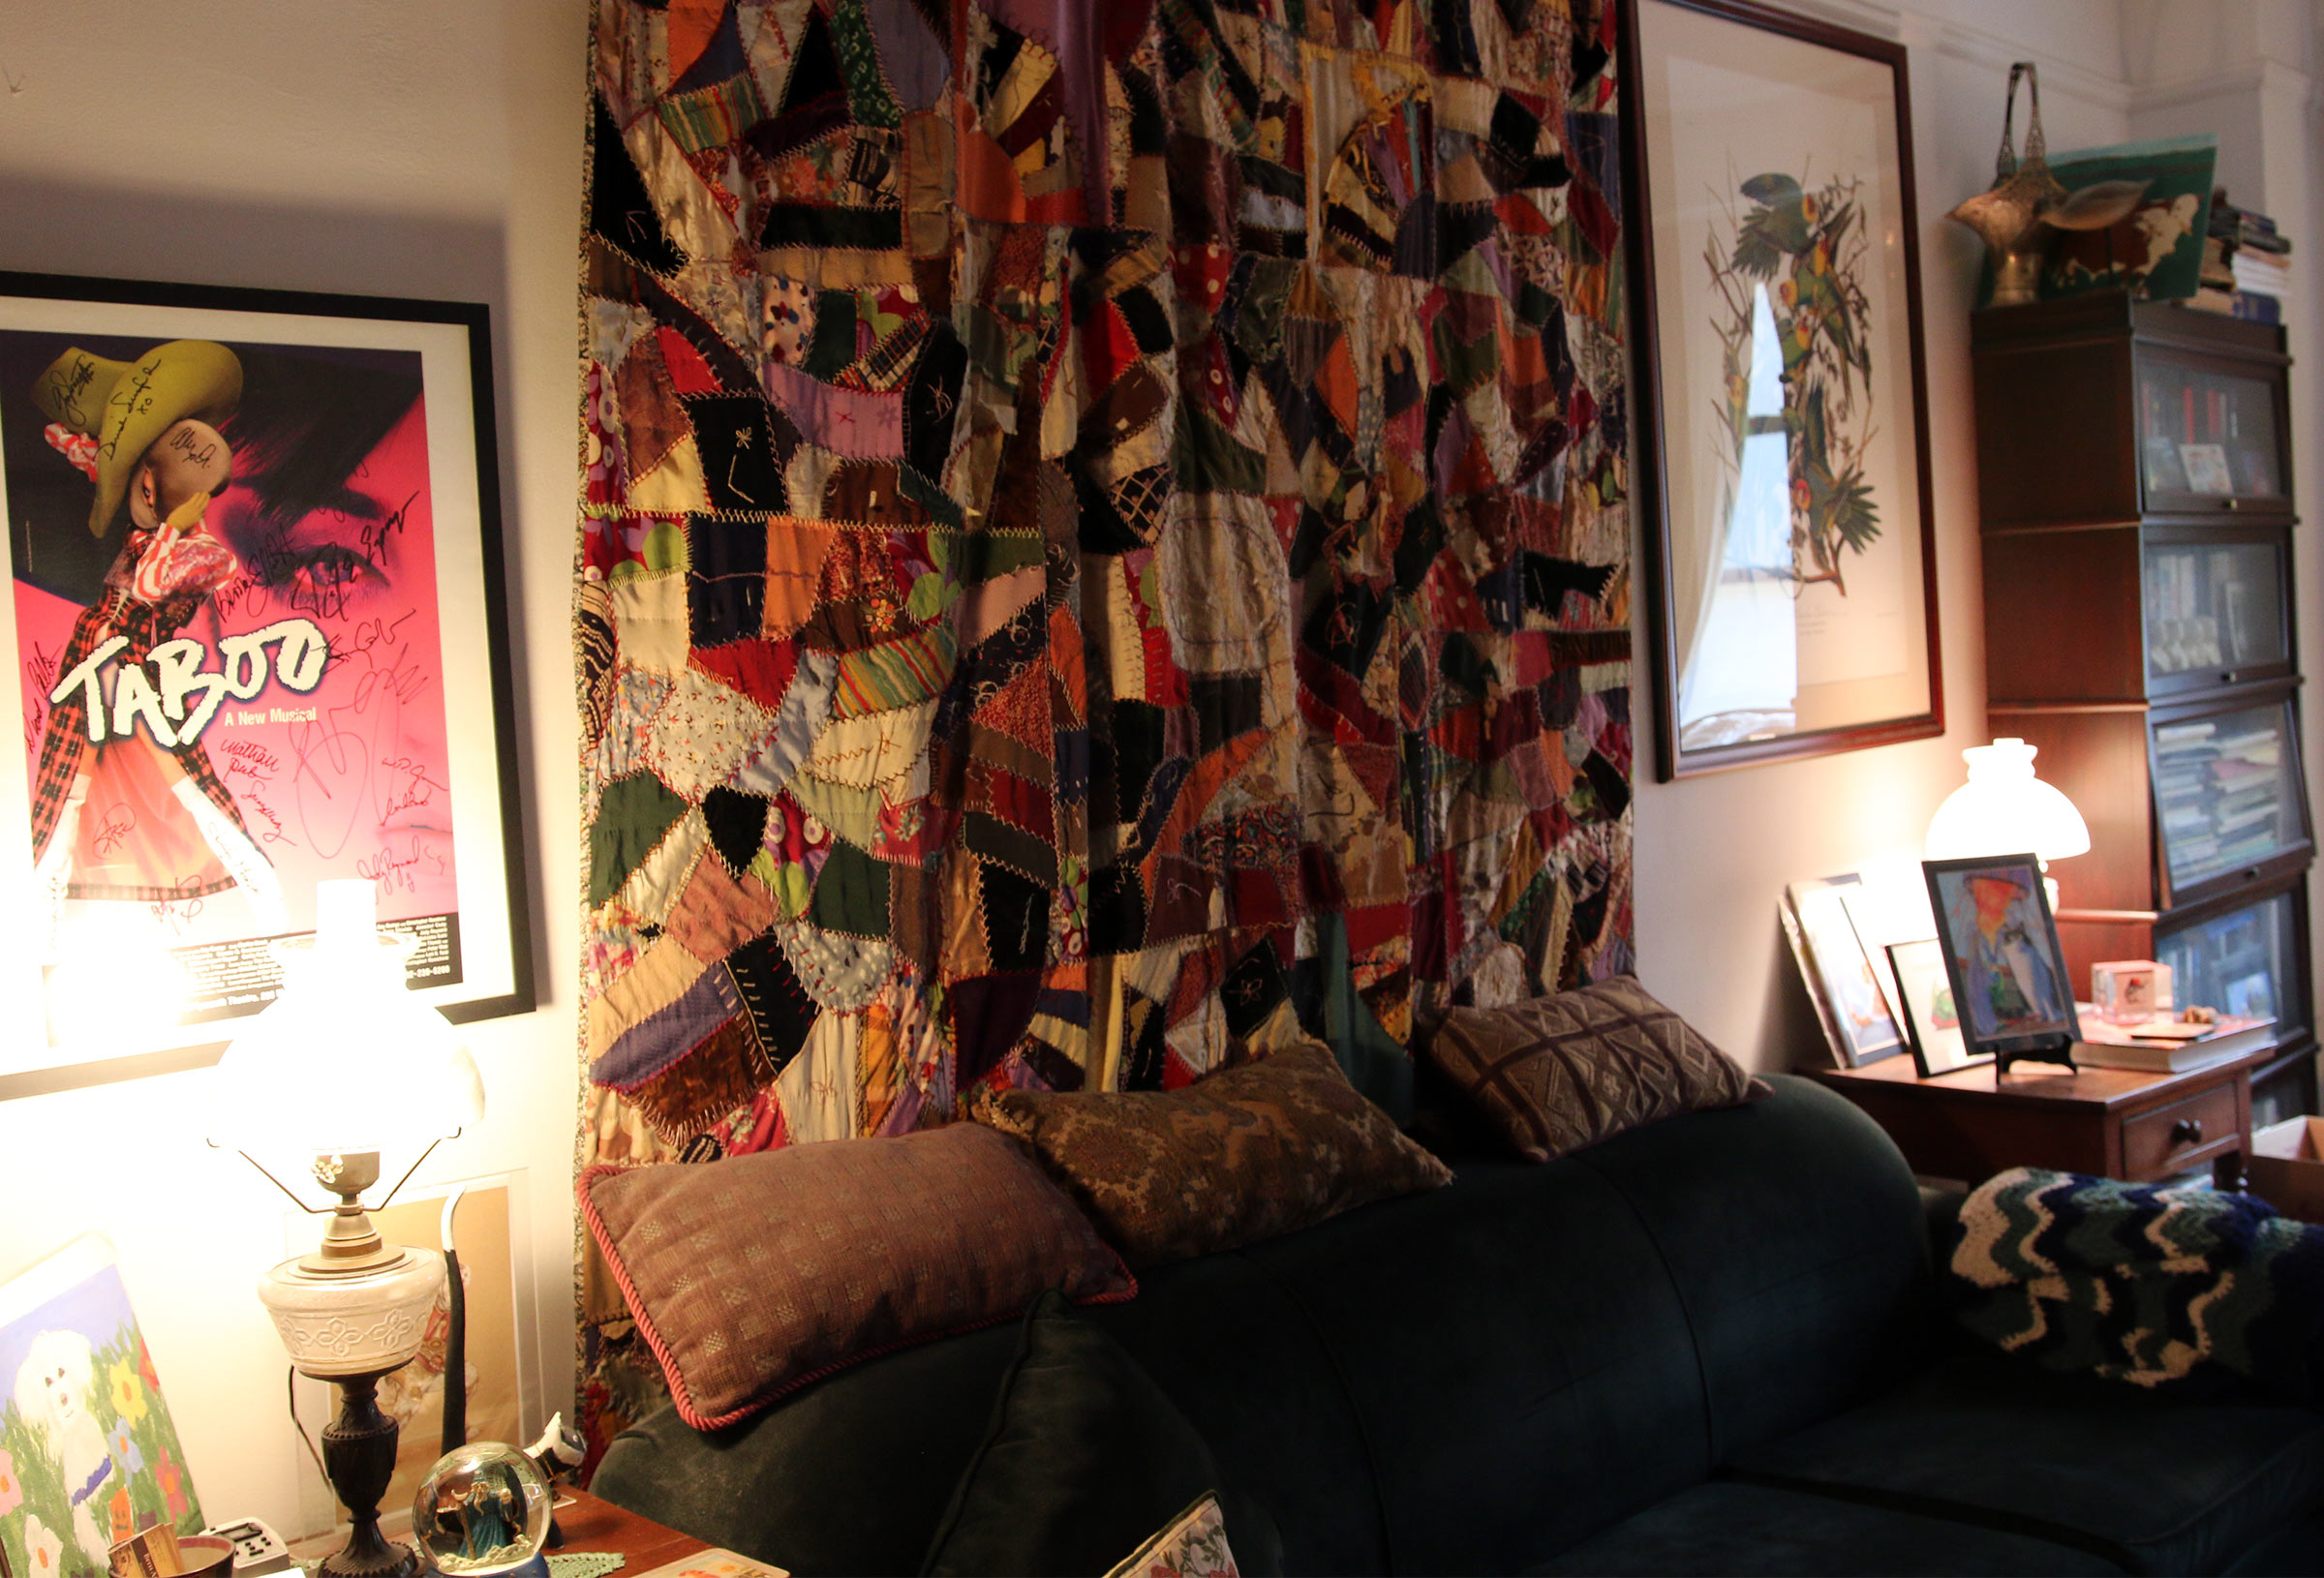 A view of the entire quilt hanging on one of the wall's oin Beth Anderson's living room behind a couch and in between two posters.